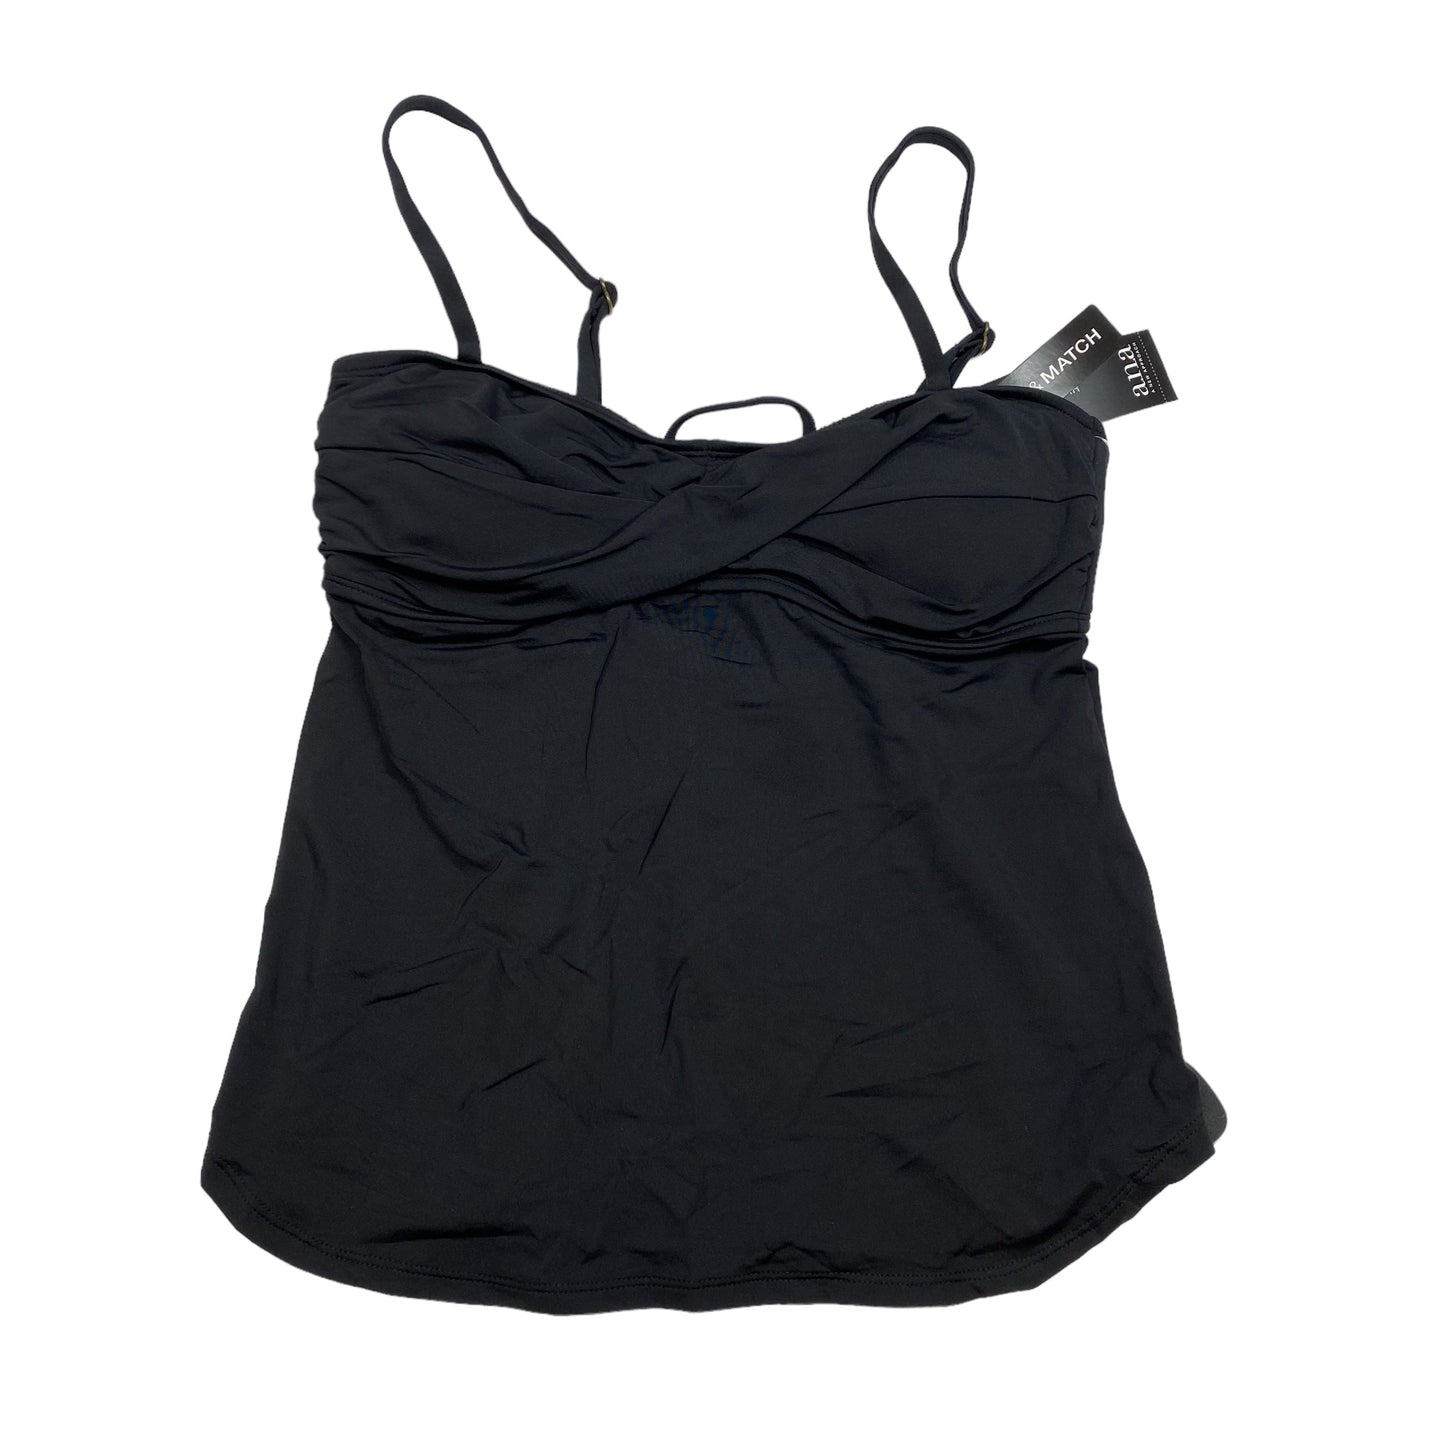 Black Swimsuit Top Ana, Size S